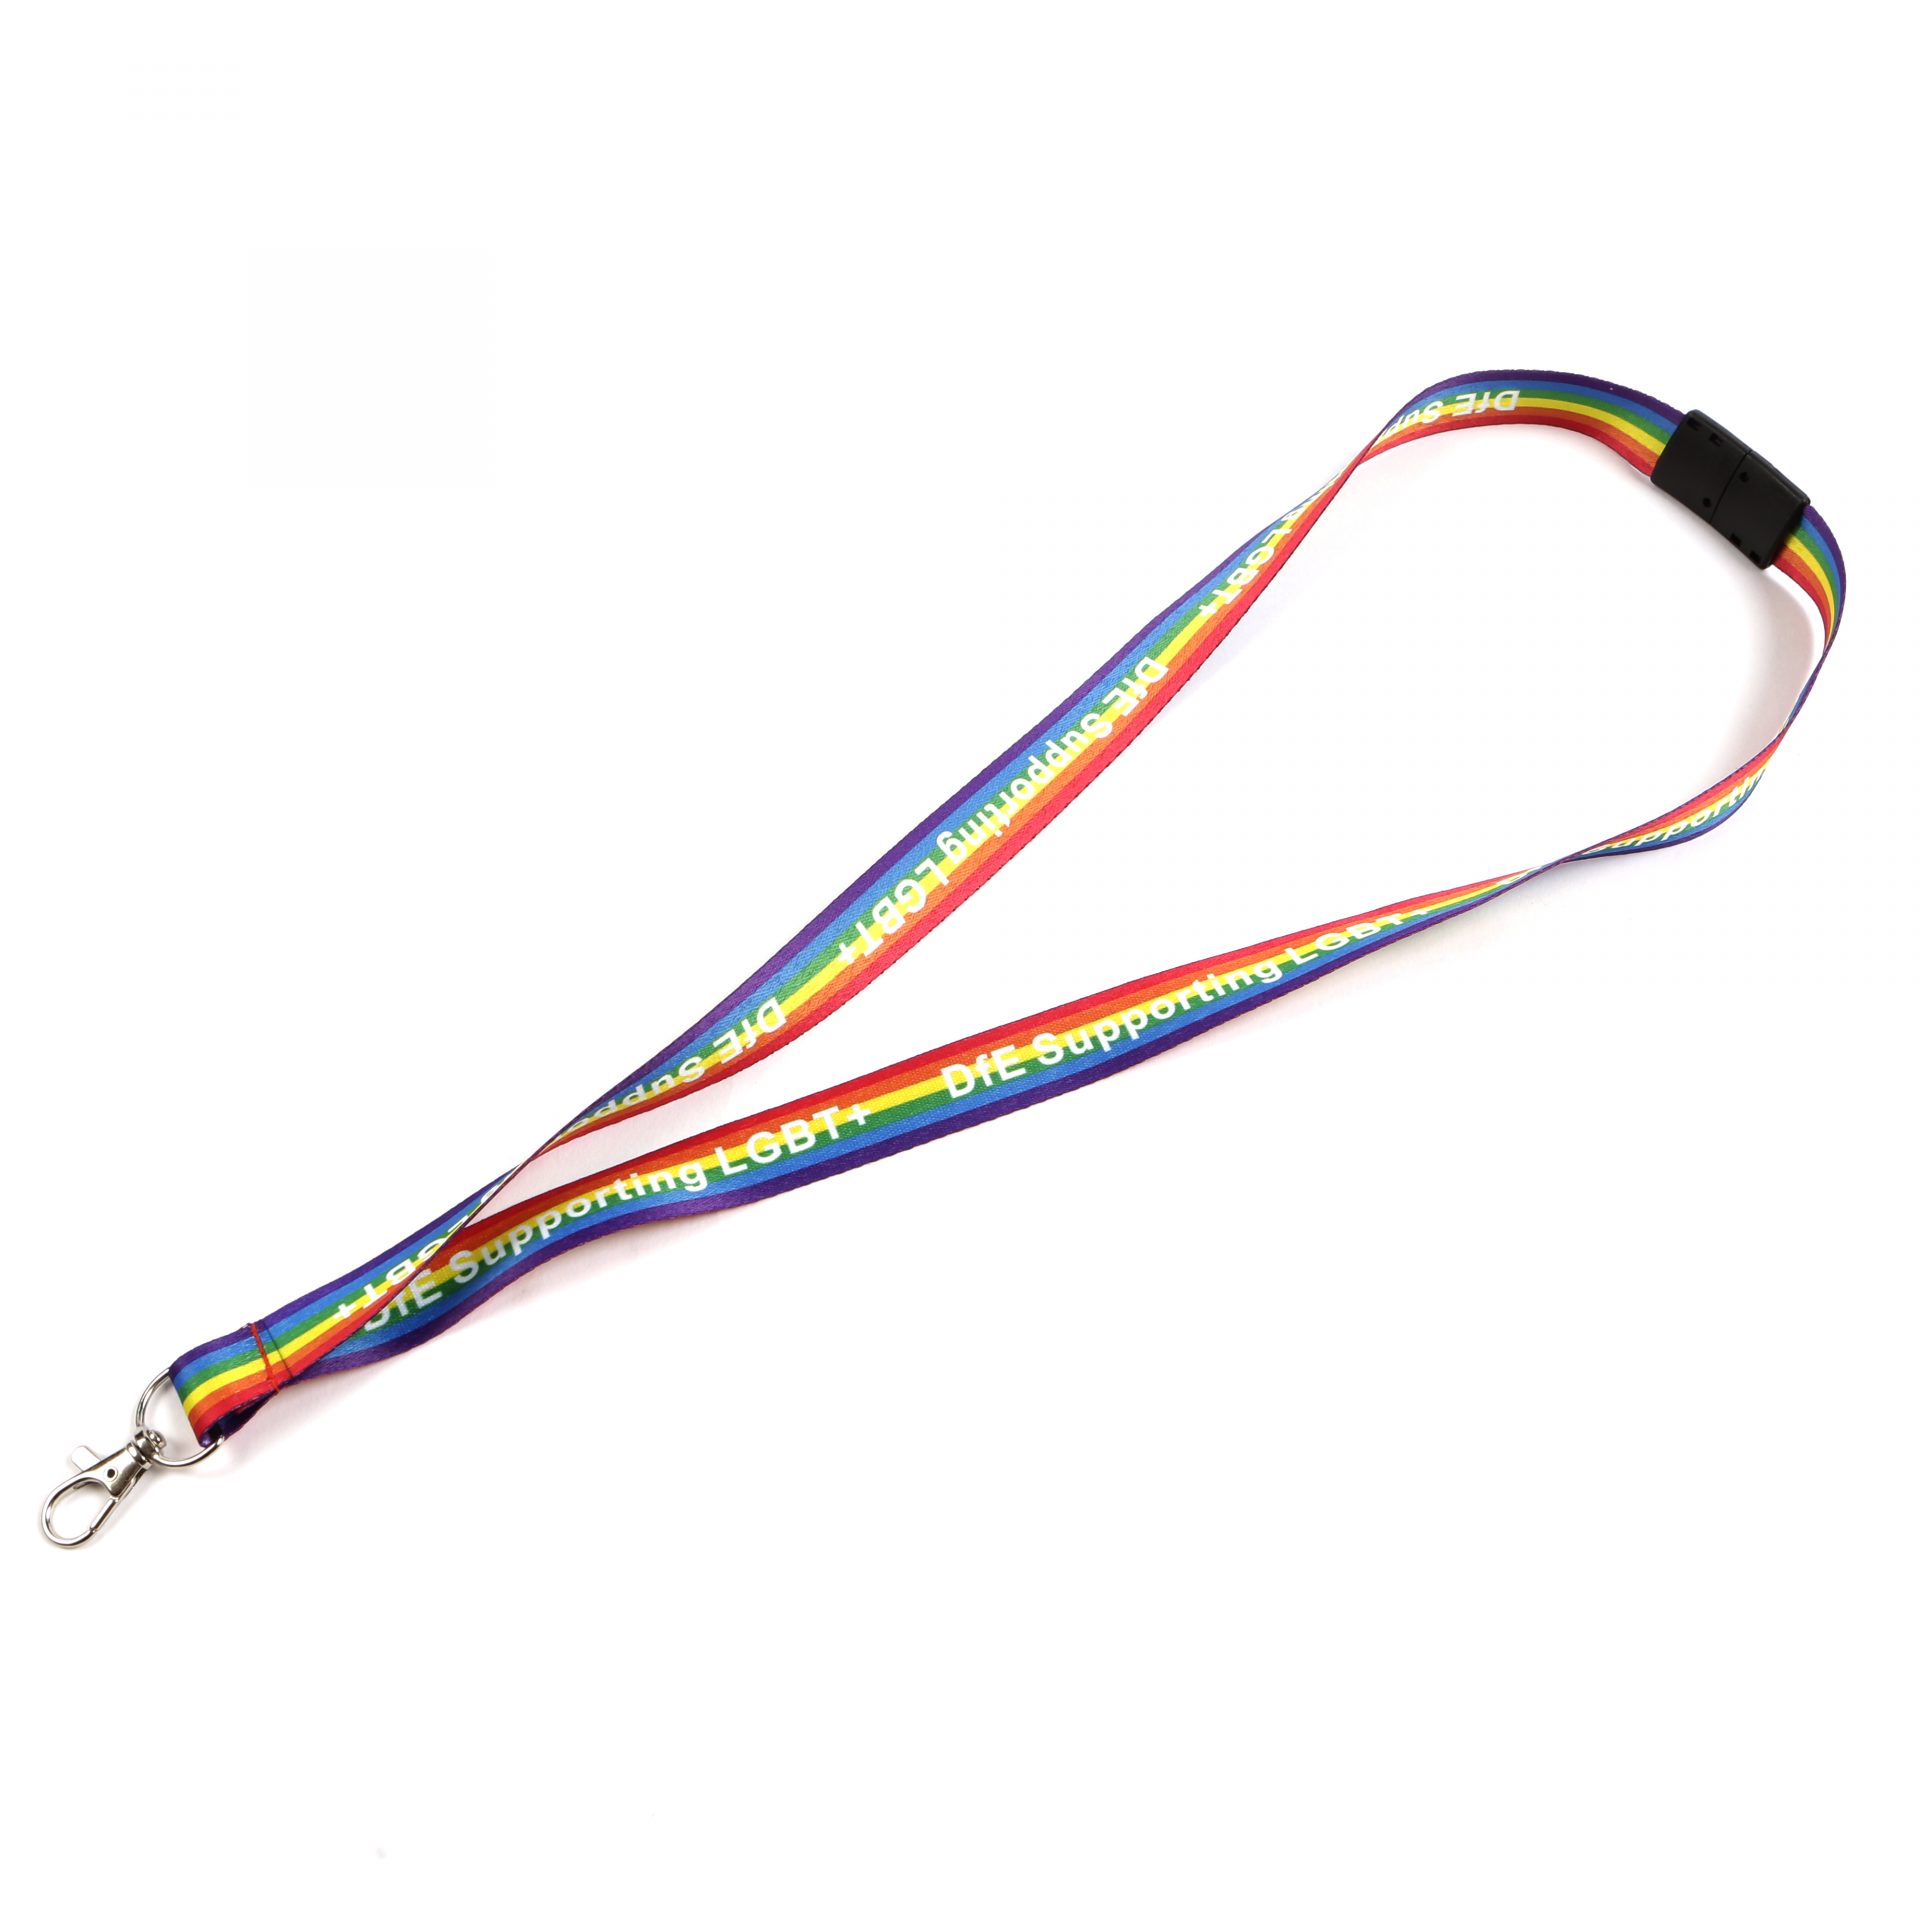 Buy Deluxe Full Colour Printed Lanyards (Copy) on Lanyards Direct Today!